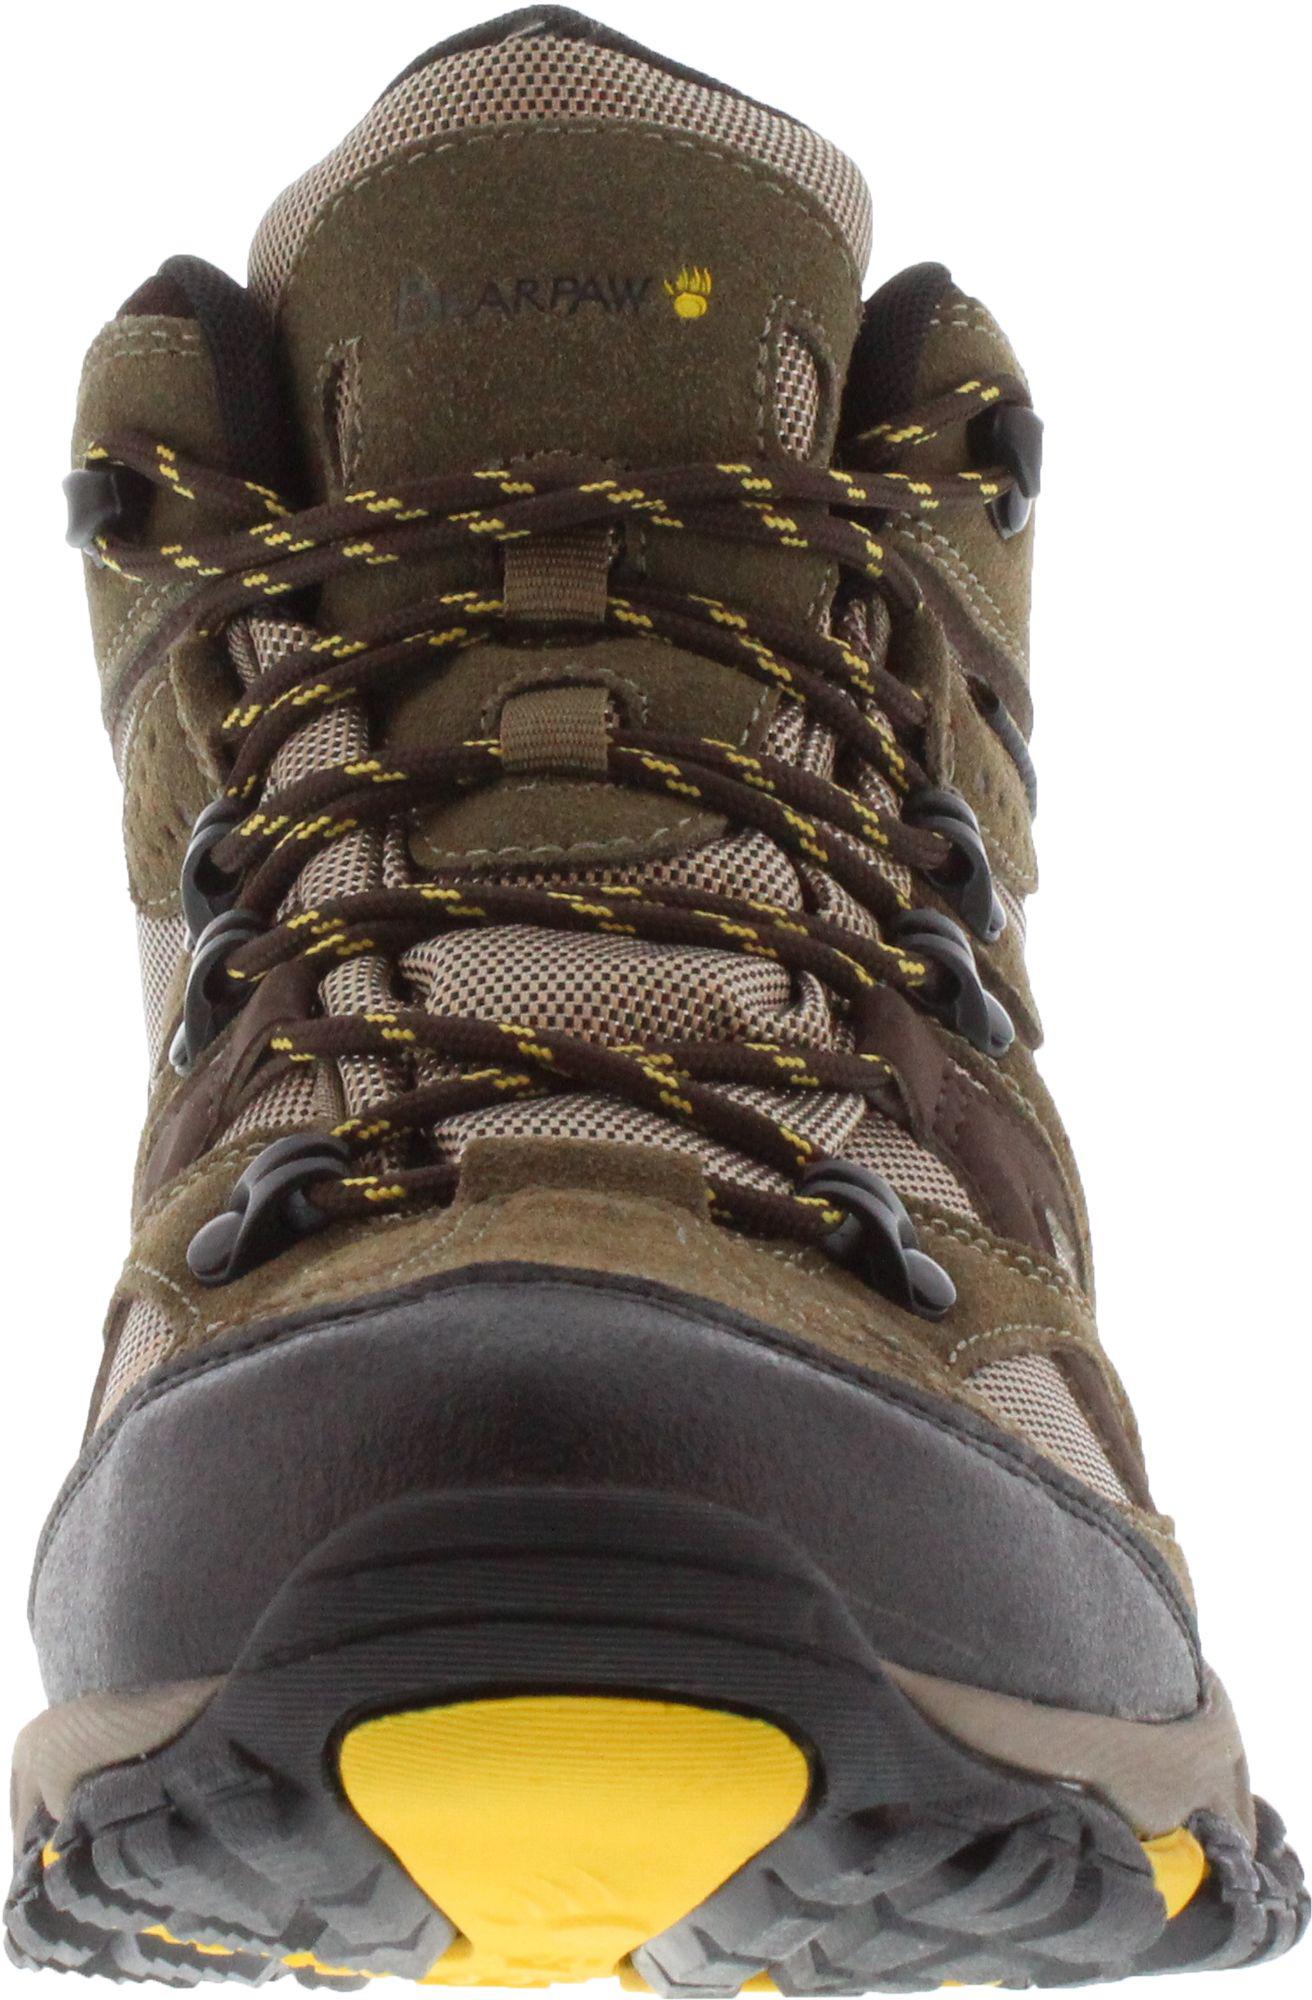 BEARPAW Rubber Rock Mid Waterproof Hiking Boots in Olive (Green) for ...